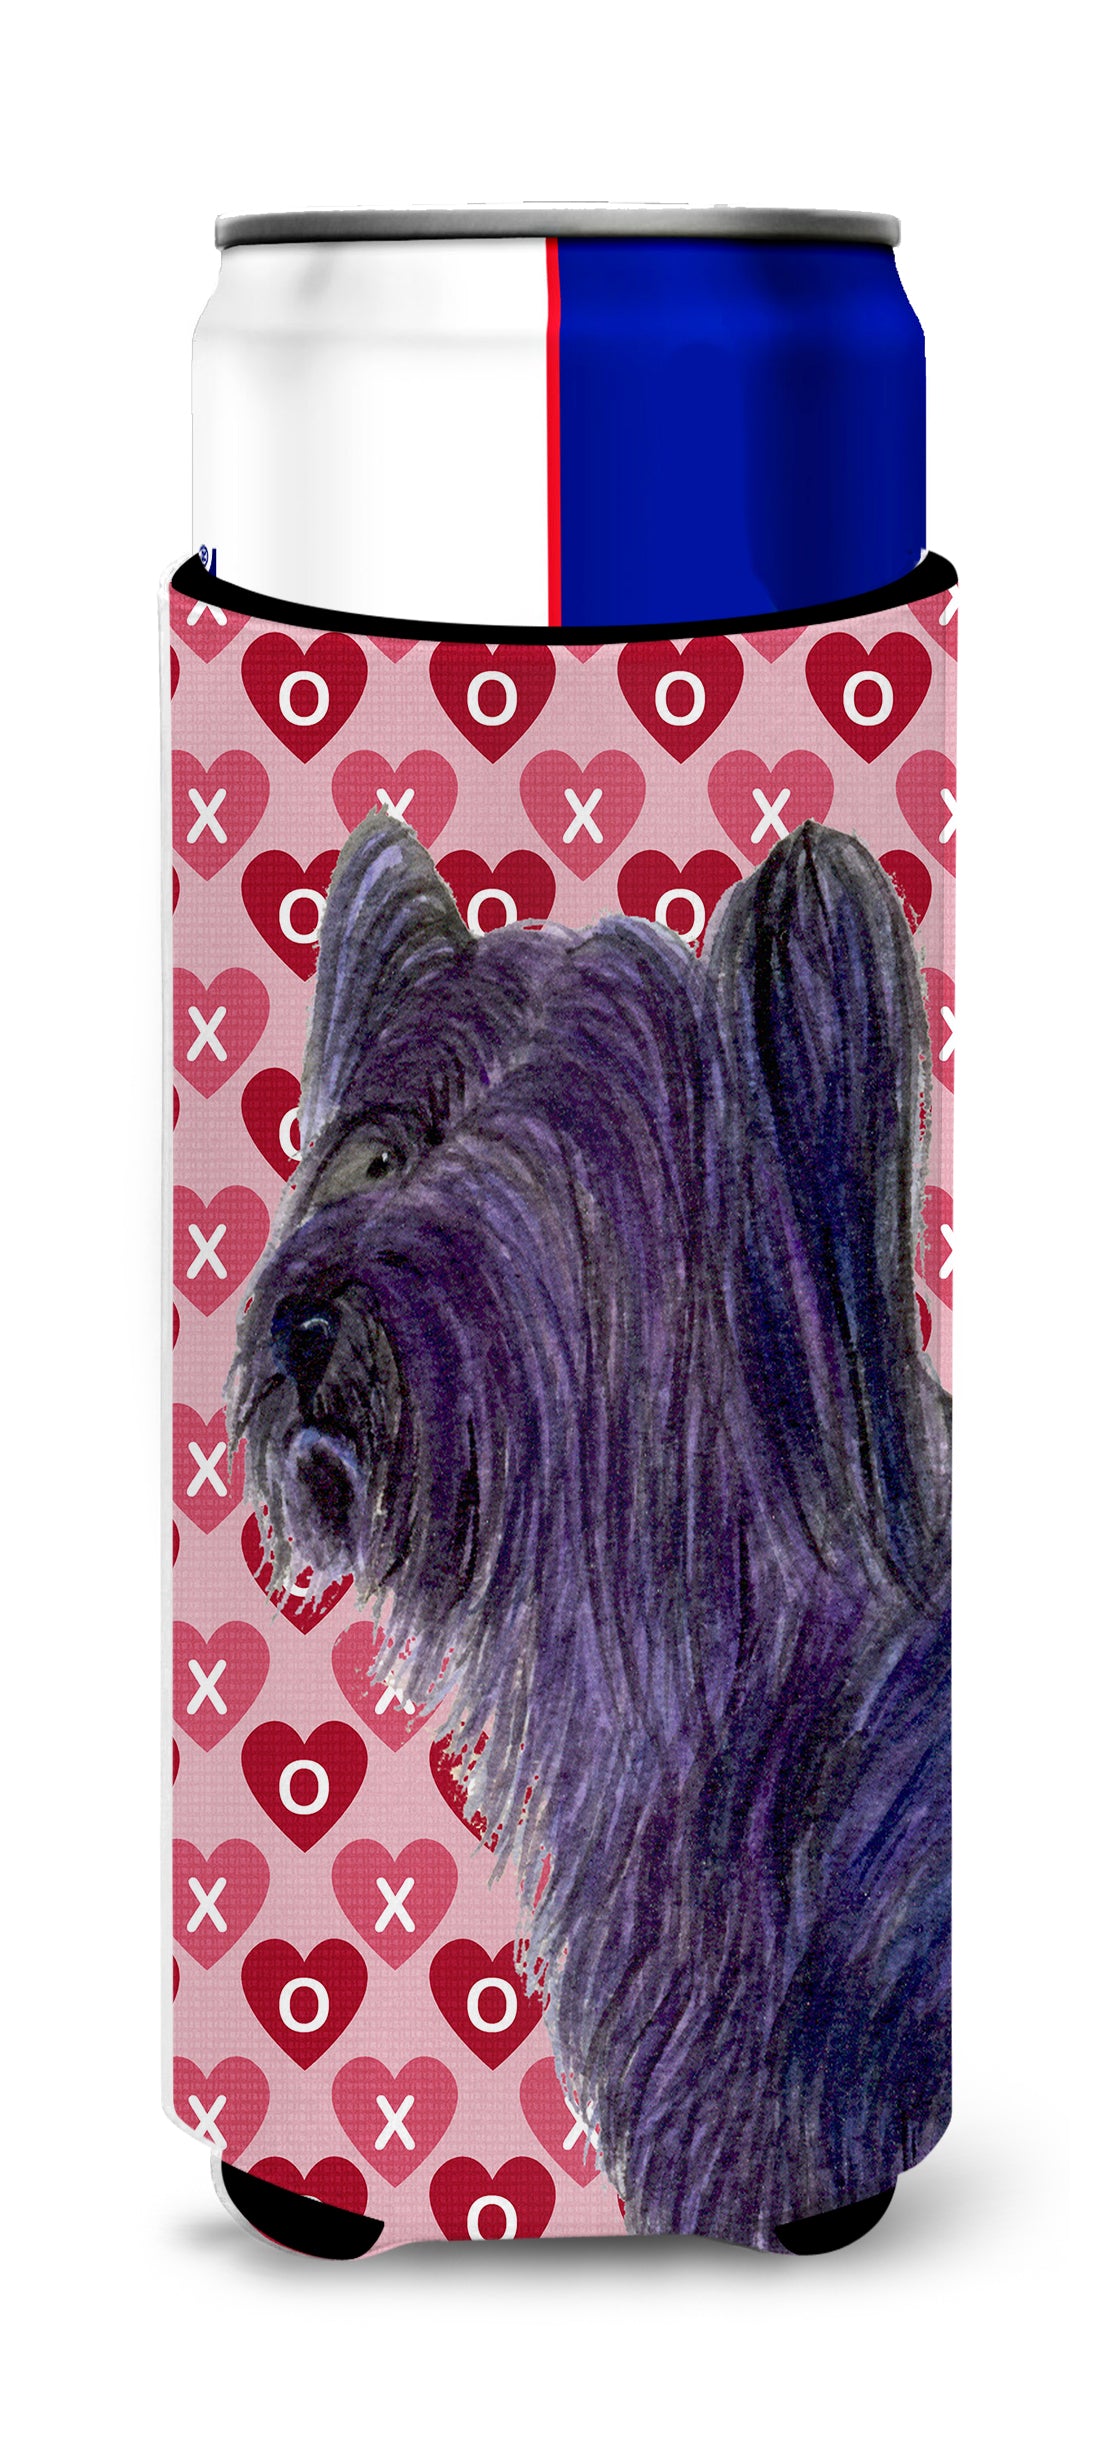 Skye Terrier Hearts Love and Valentine's Day Portrait Ultra Beverage Insulators for slim cans SS4463MUK.